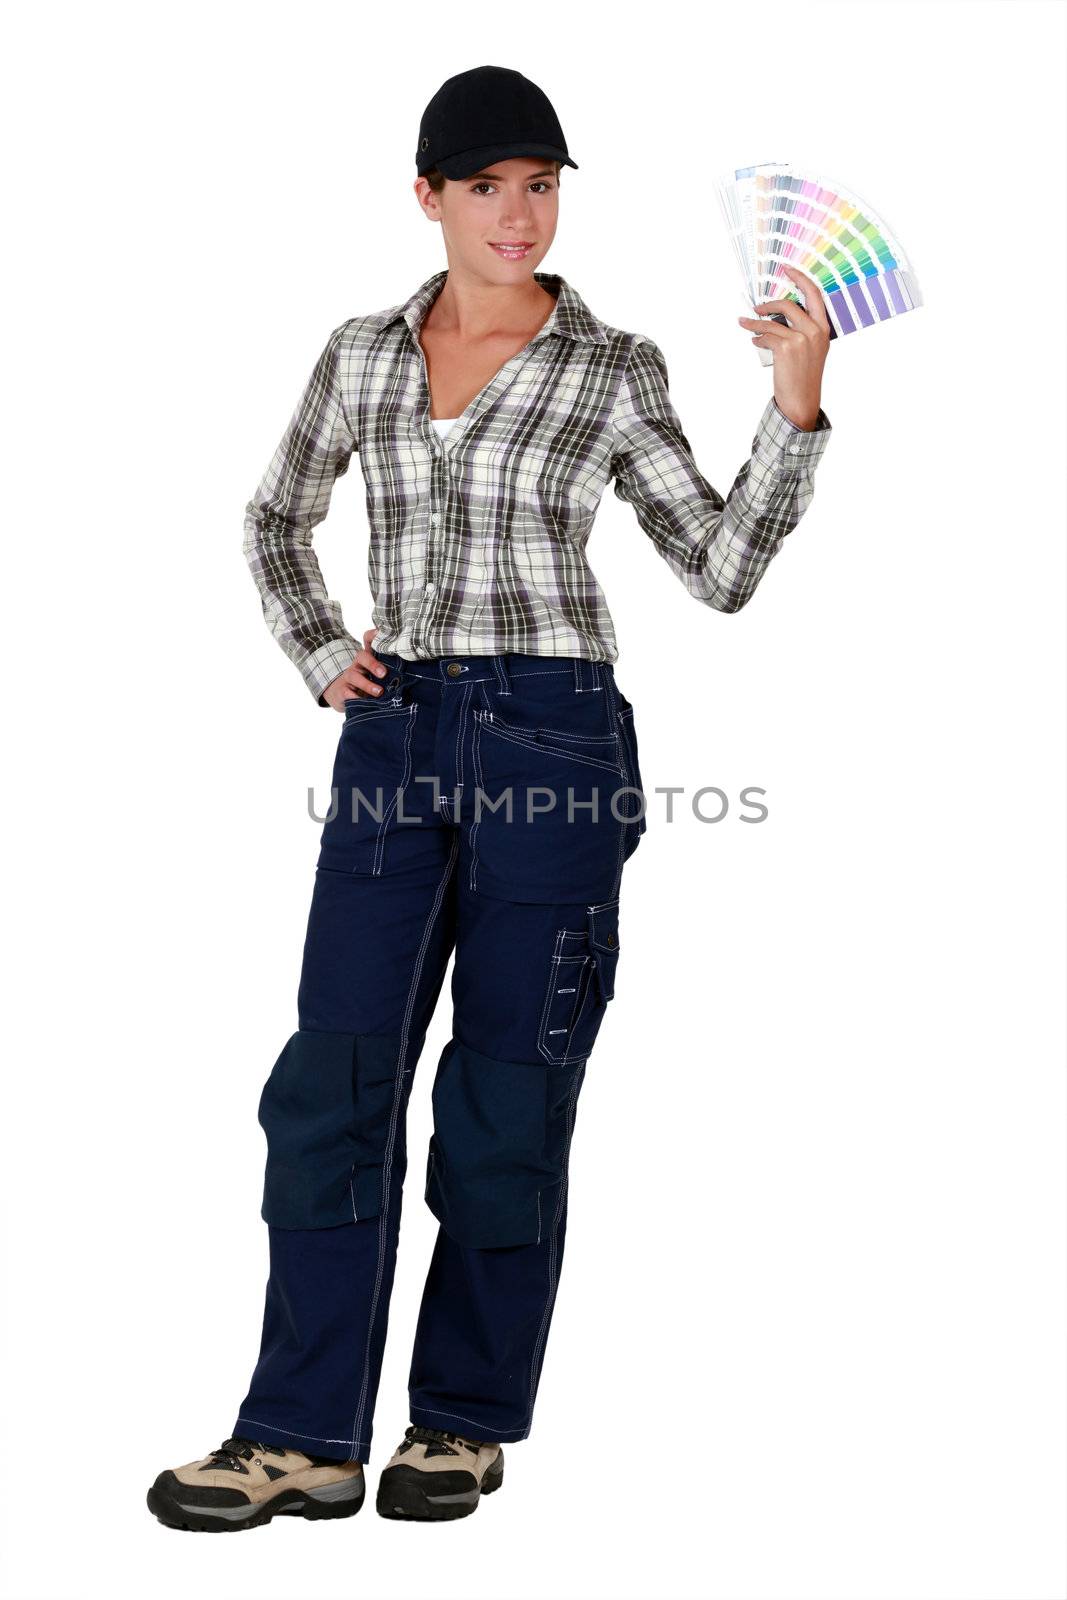 Woman with color charts by phovoir